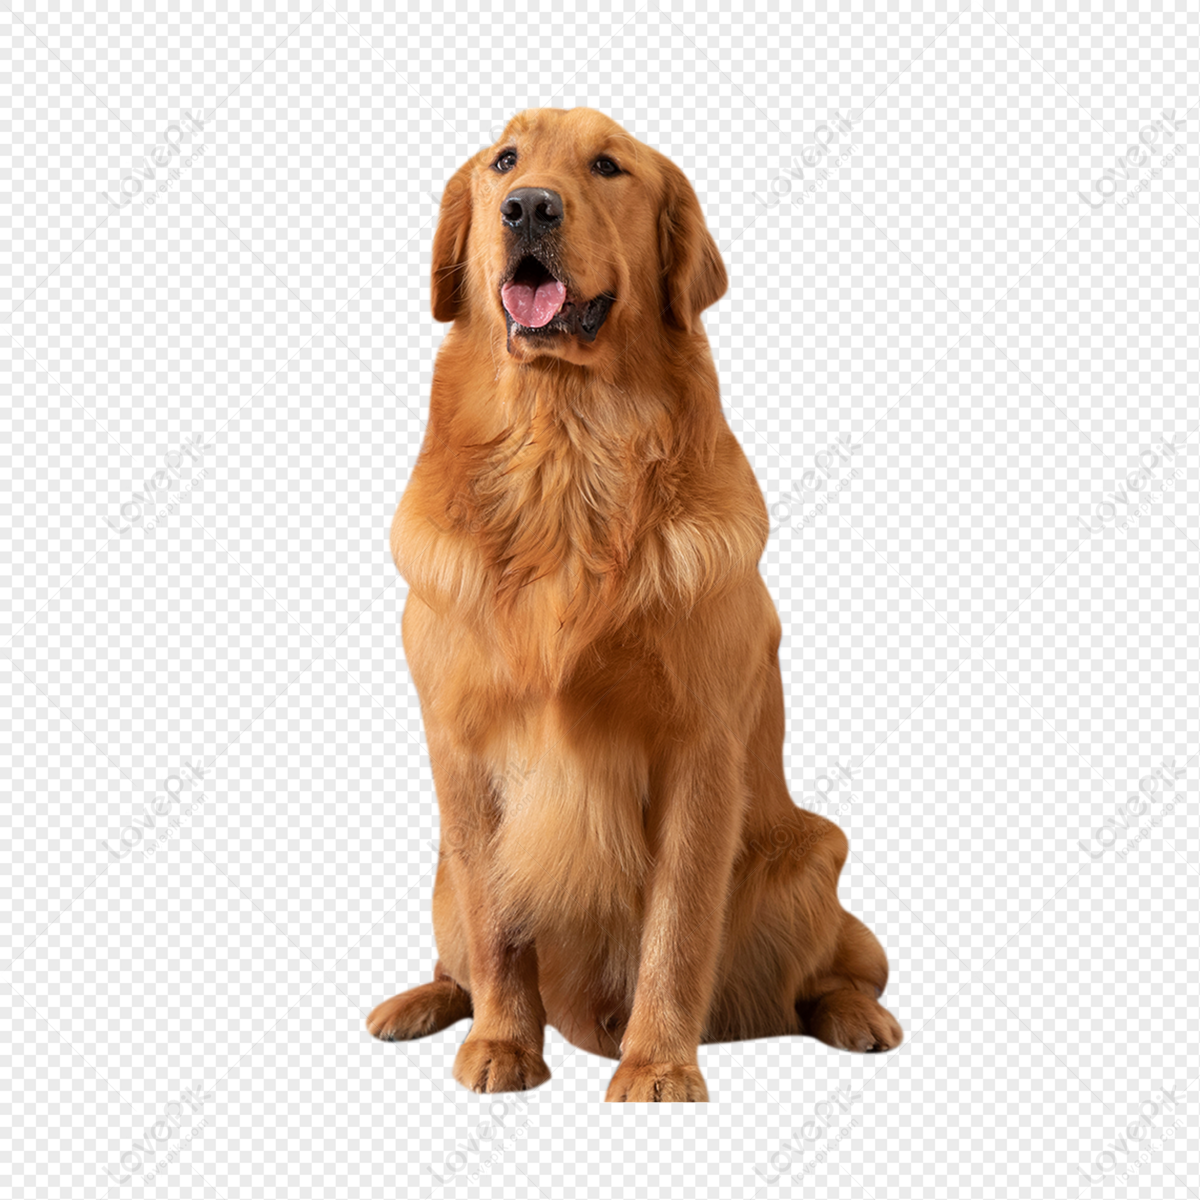 Golden Dog PNG White Transparent And Clipart Image For Free ...